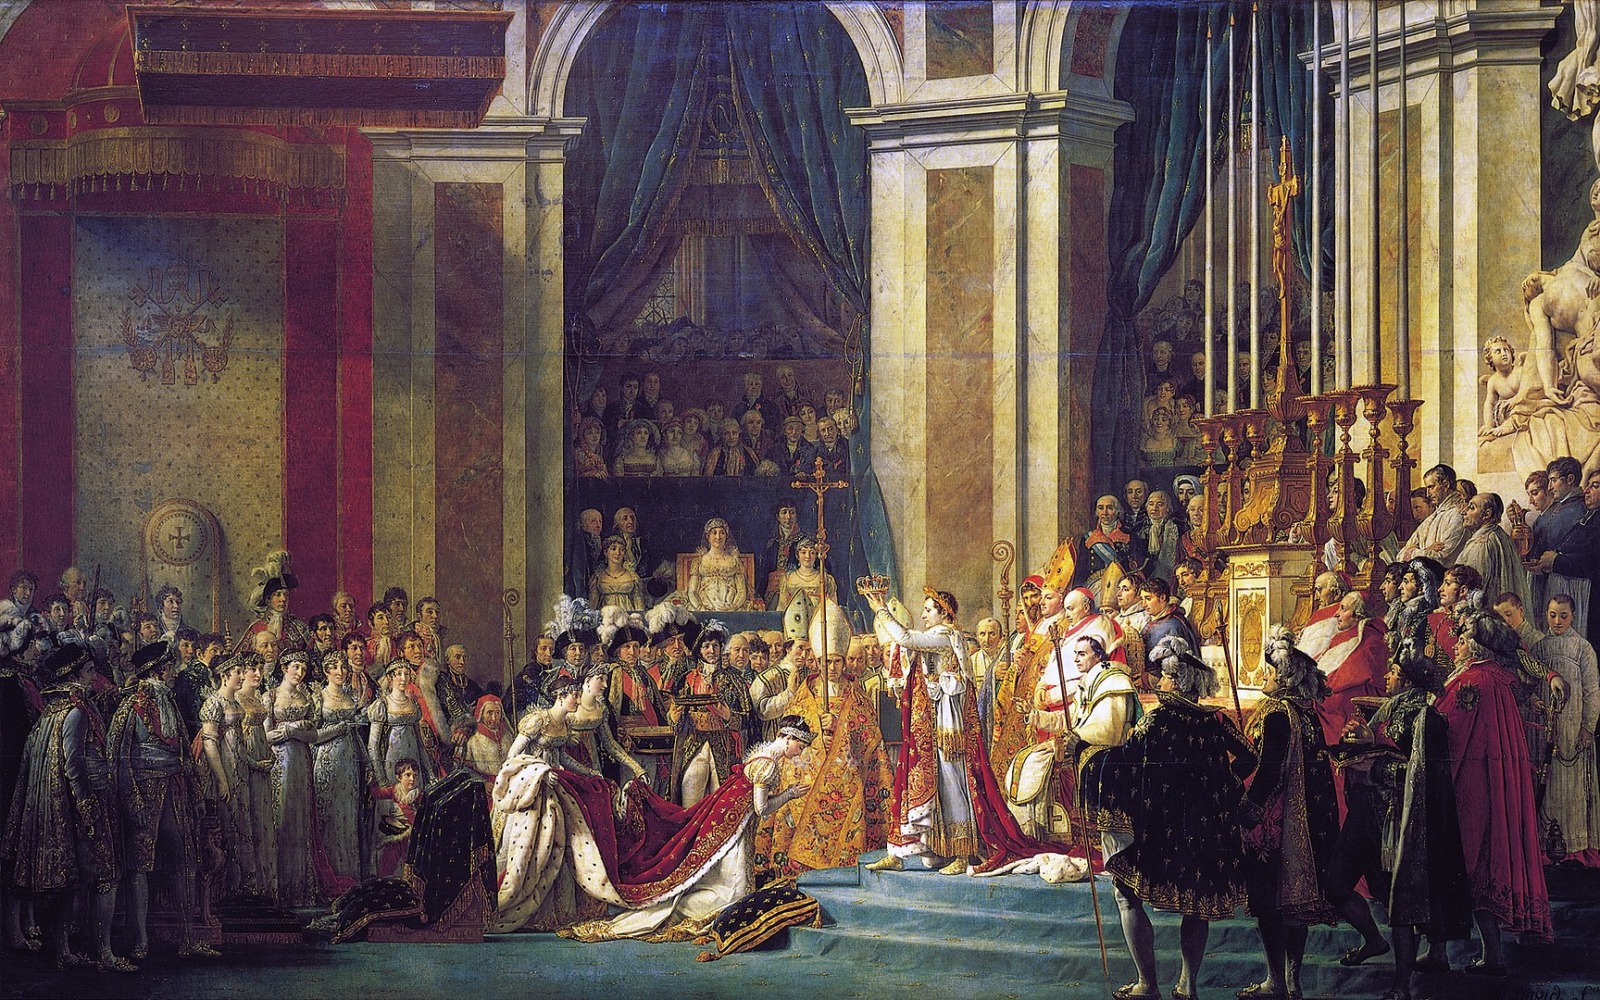 Coronation of Napoleon inside the cathedral. Painting by Jacques-Louis David